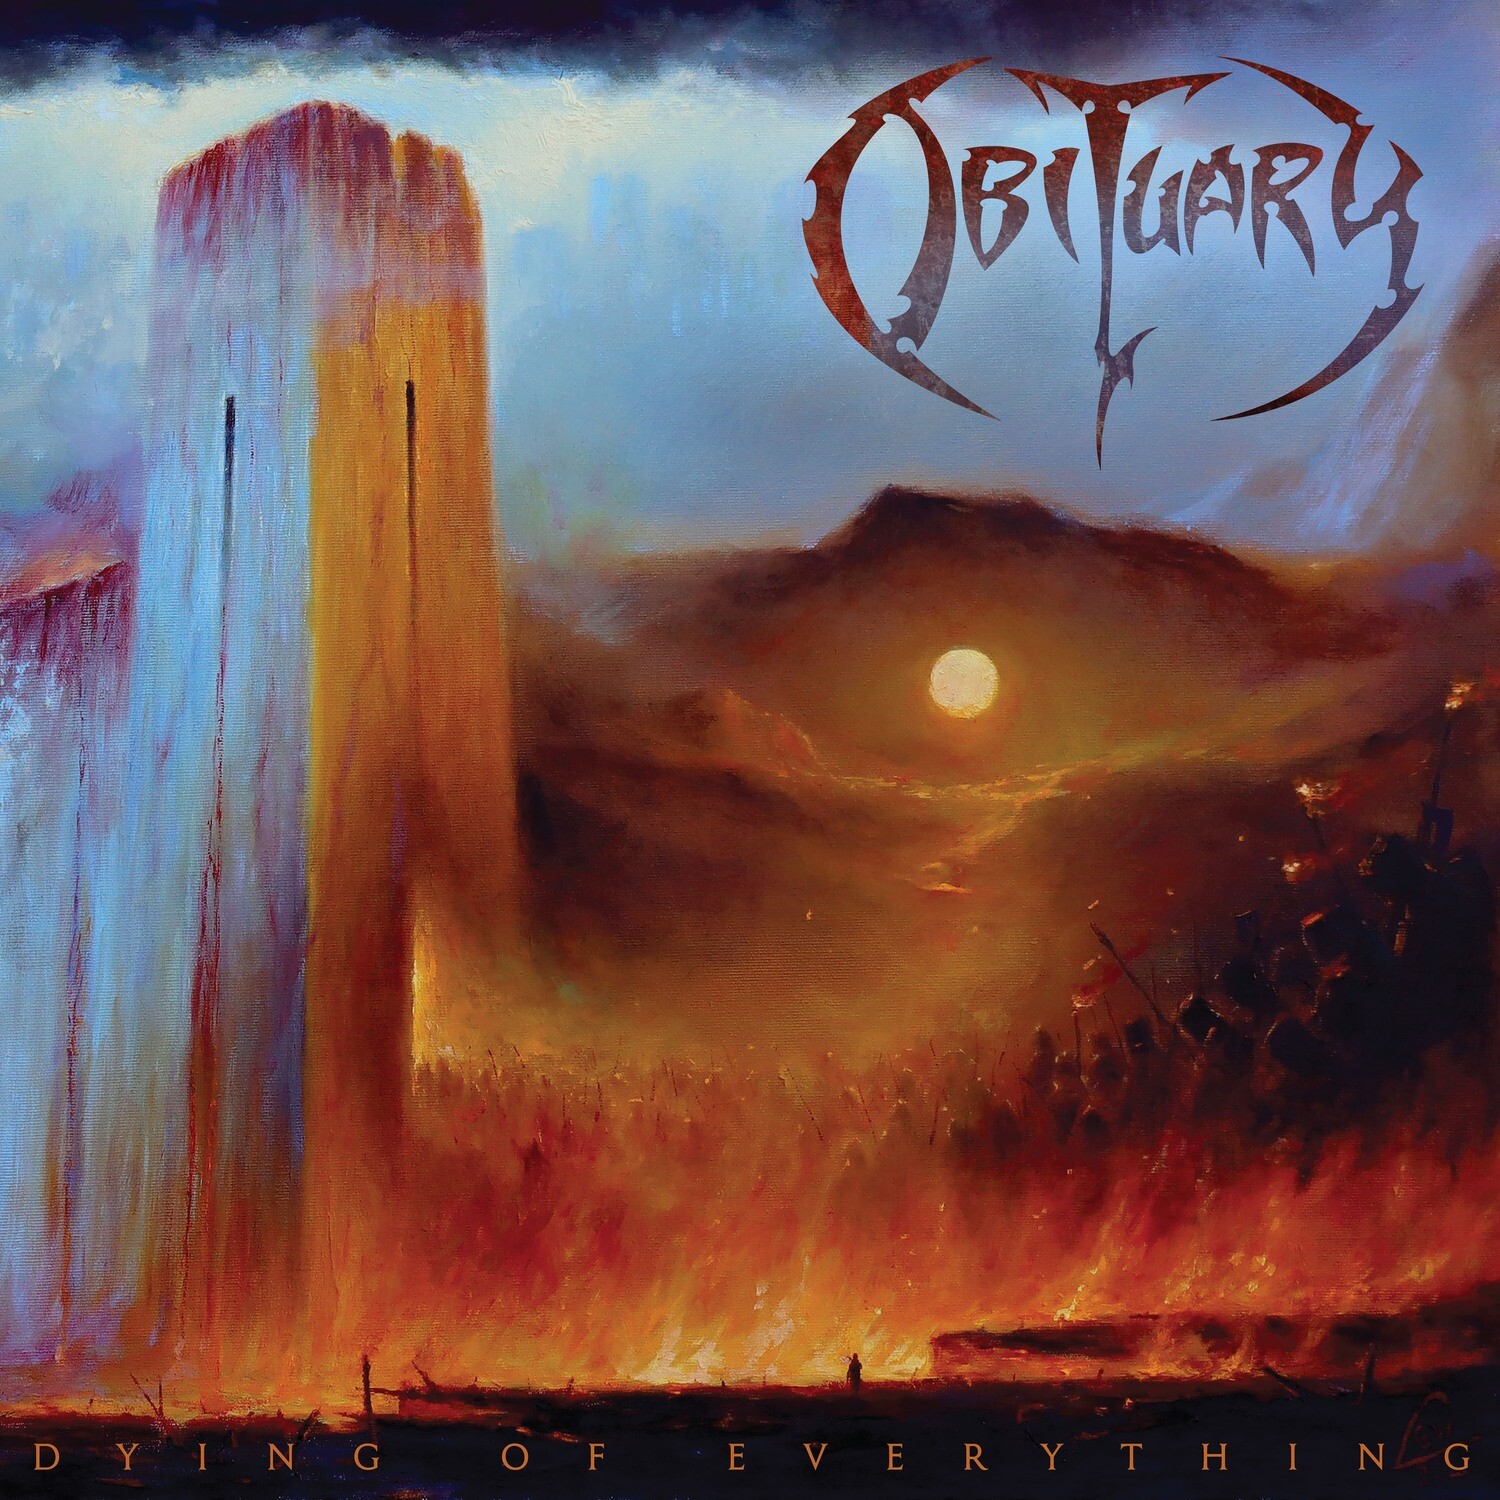 Obituary - Dying Of Everything CD (Jewel Case)